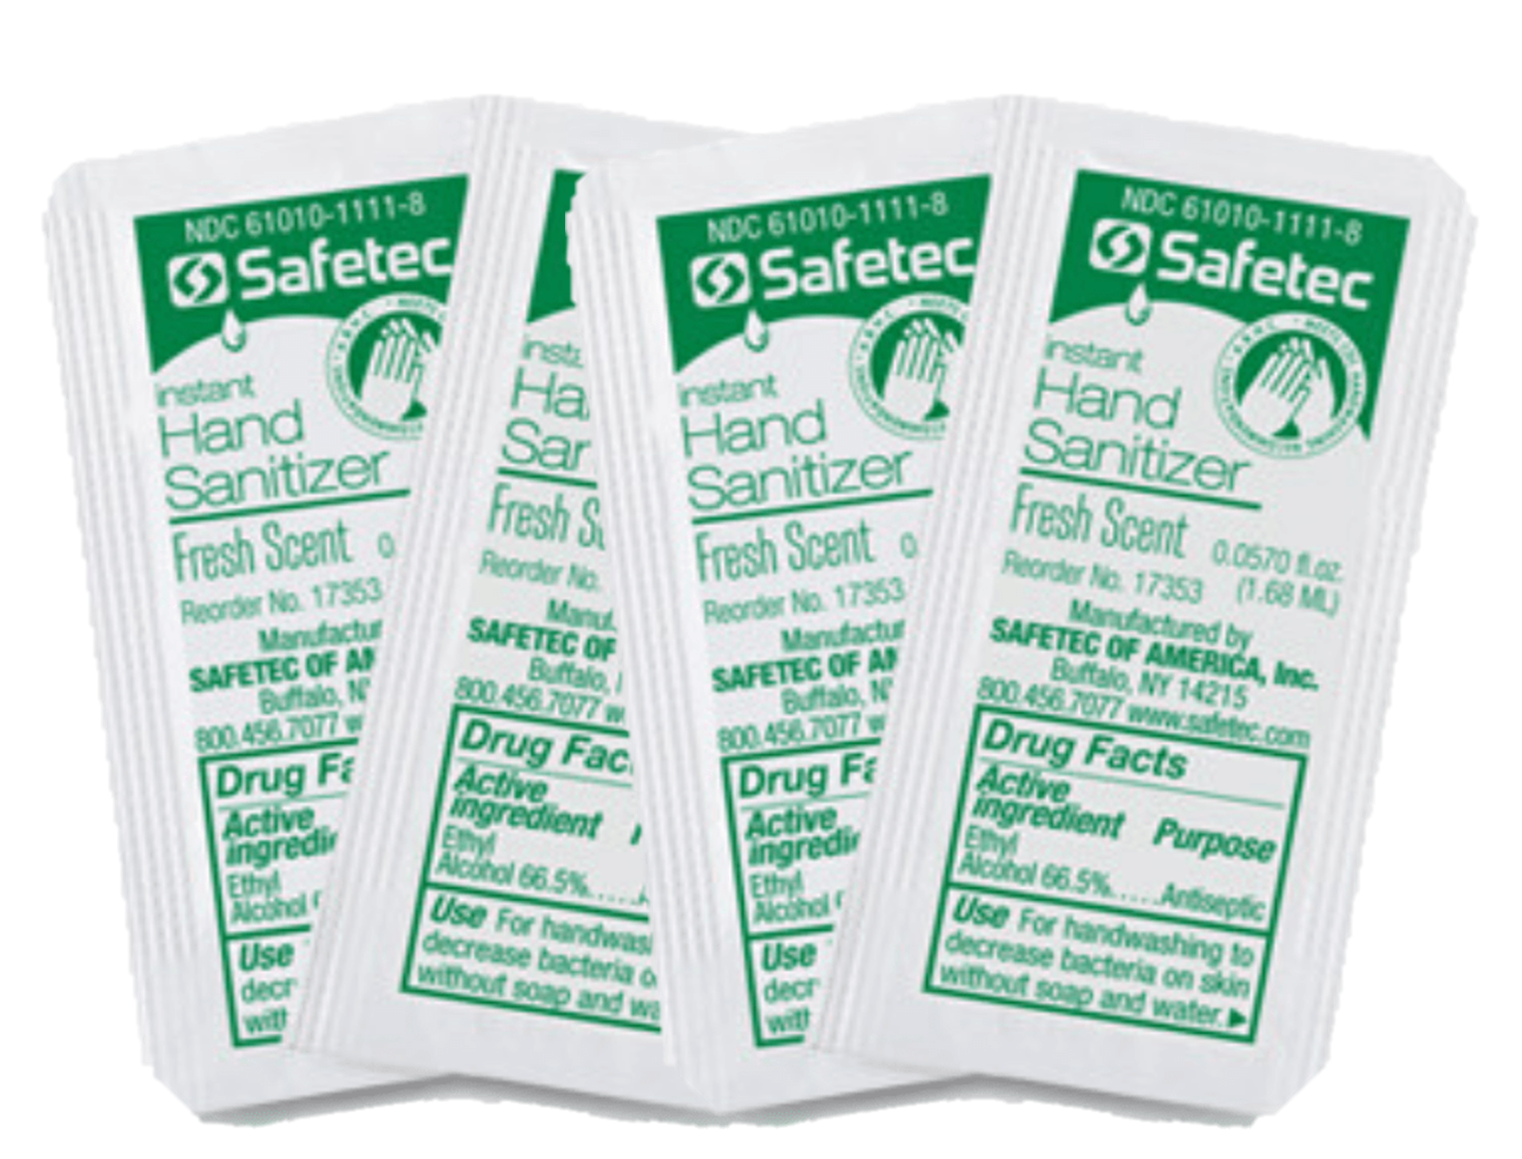 17353 Safetec® 66.5% ethyl alcohol with aloe vera Hand Sanitizer Packets (.057 ounce)